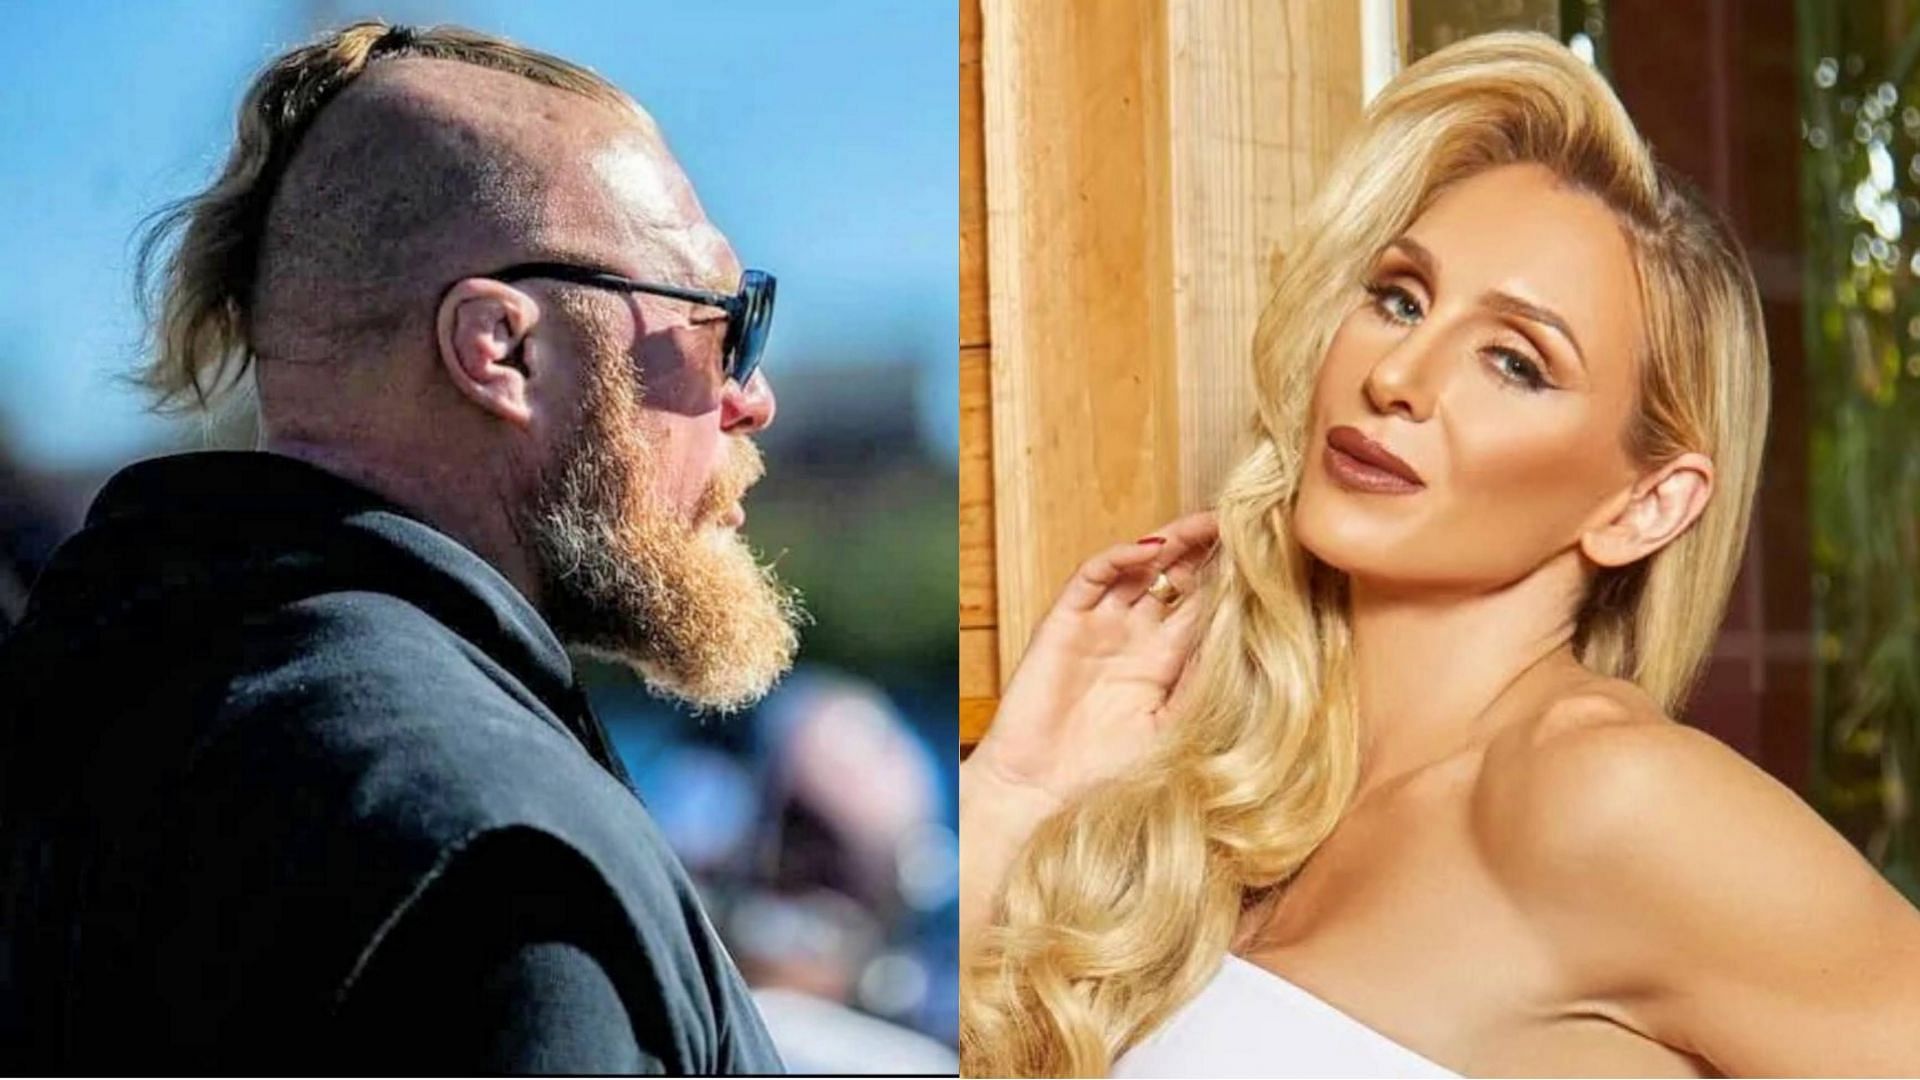 Brock Lesnar (left) and Charlotte Flair (right)